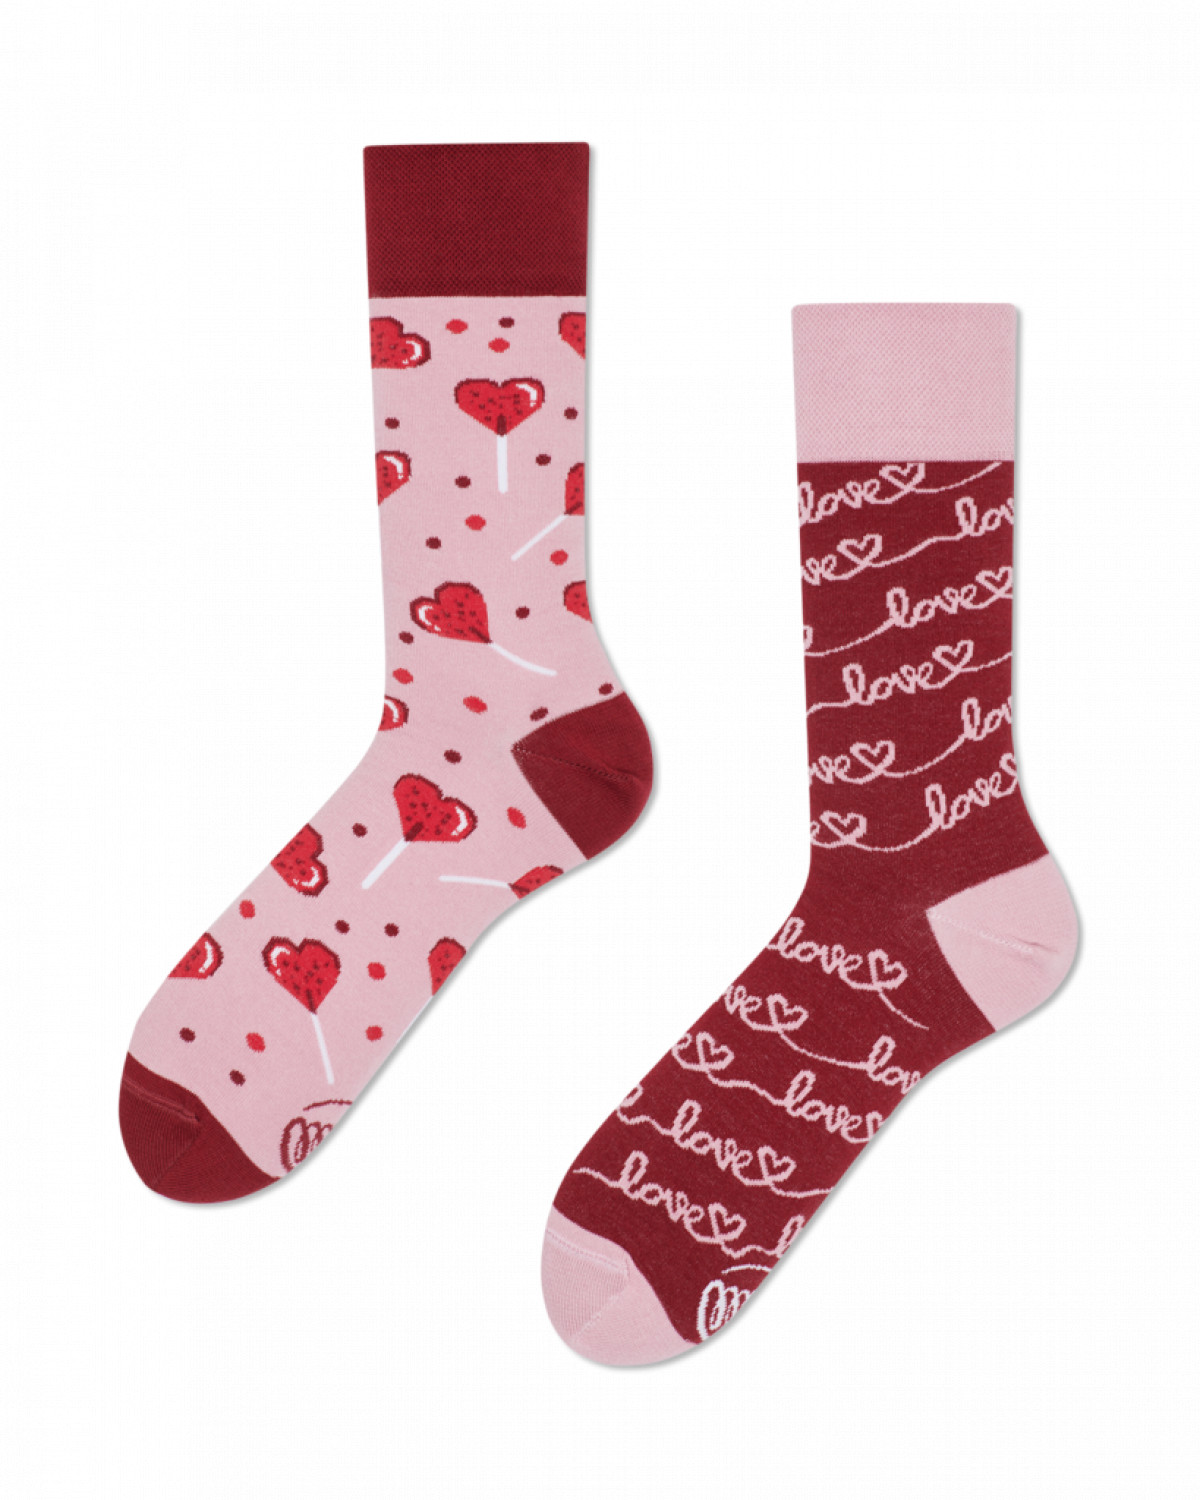 Chaussettes Many Mornings - Love Story - Boutique Toup'tibou - photo 6